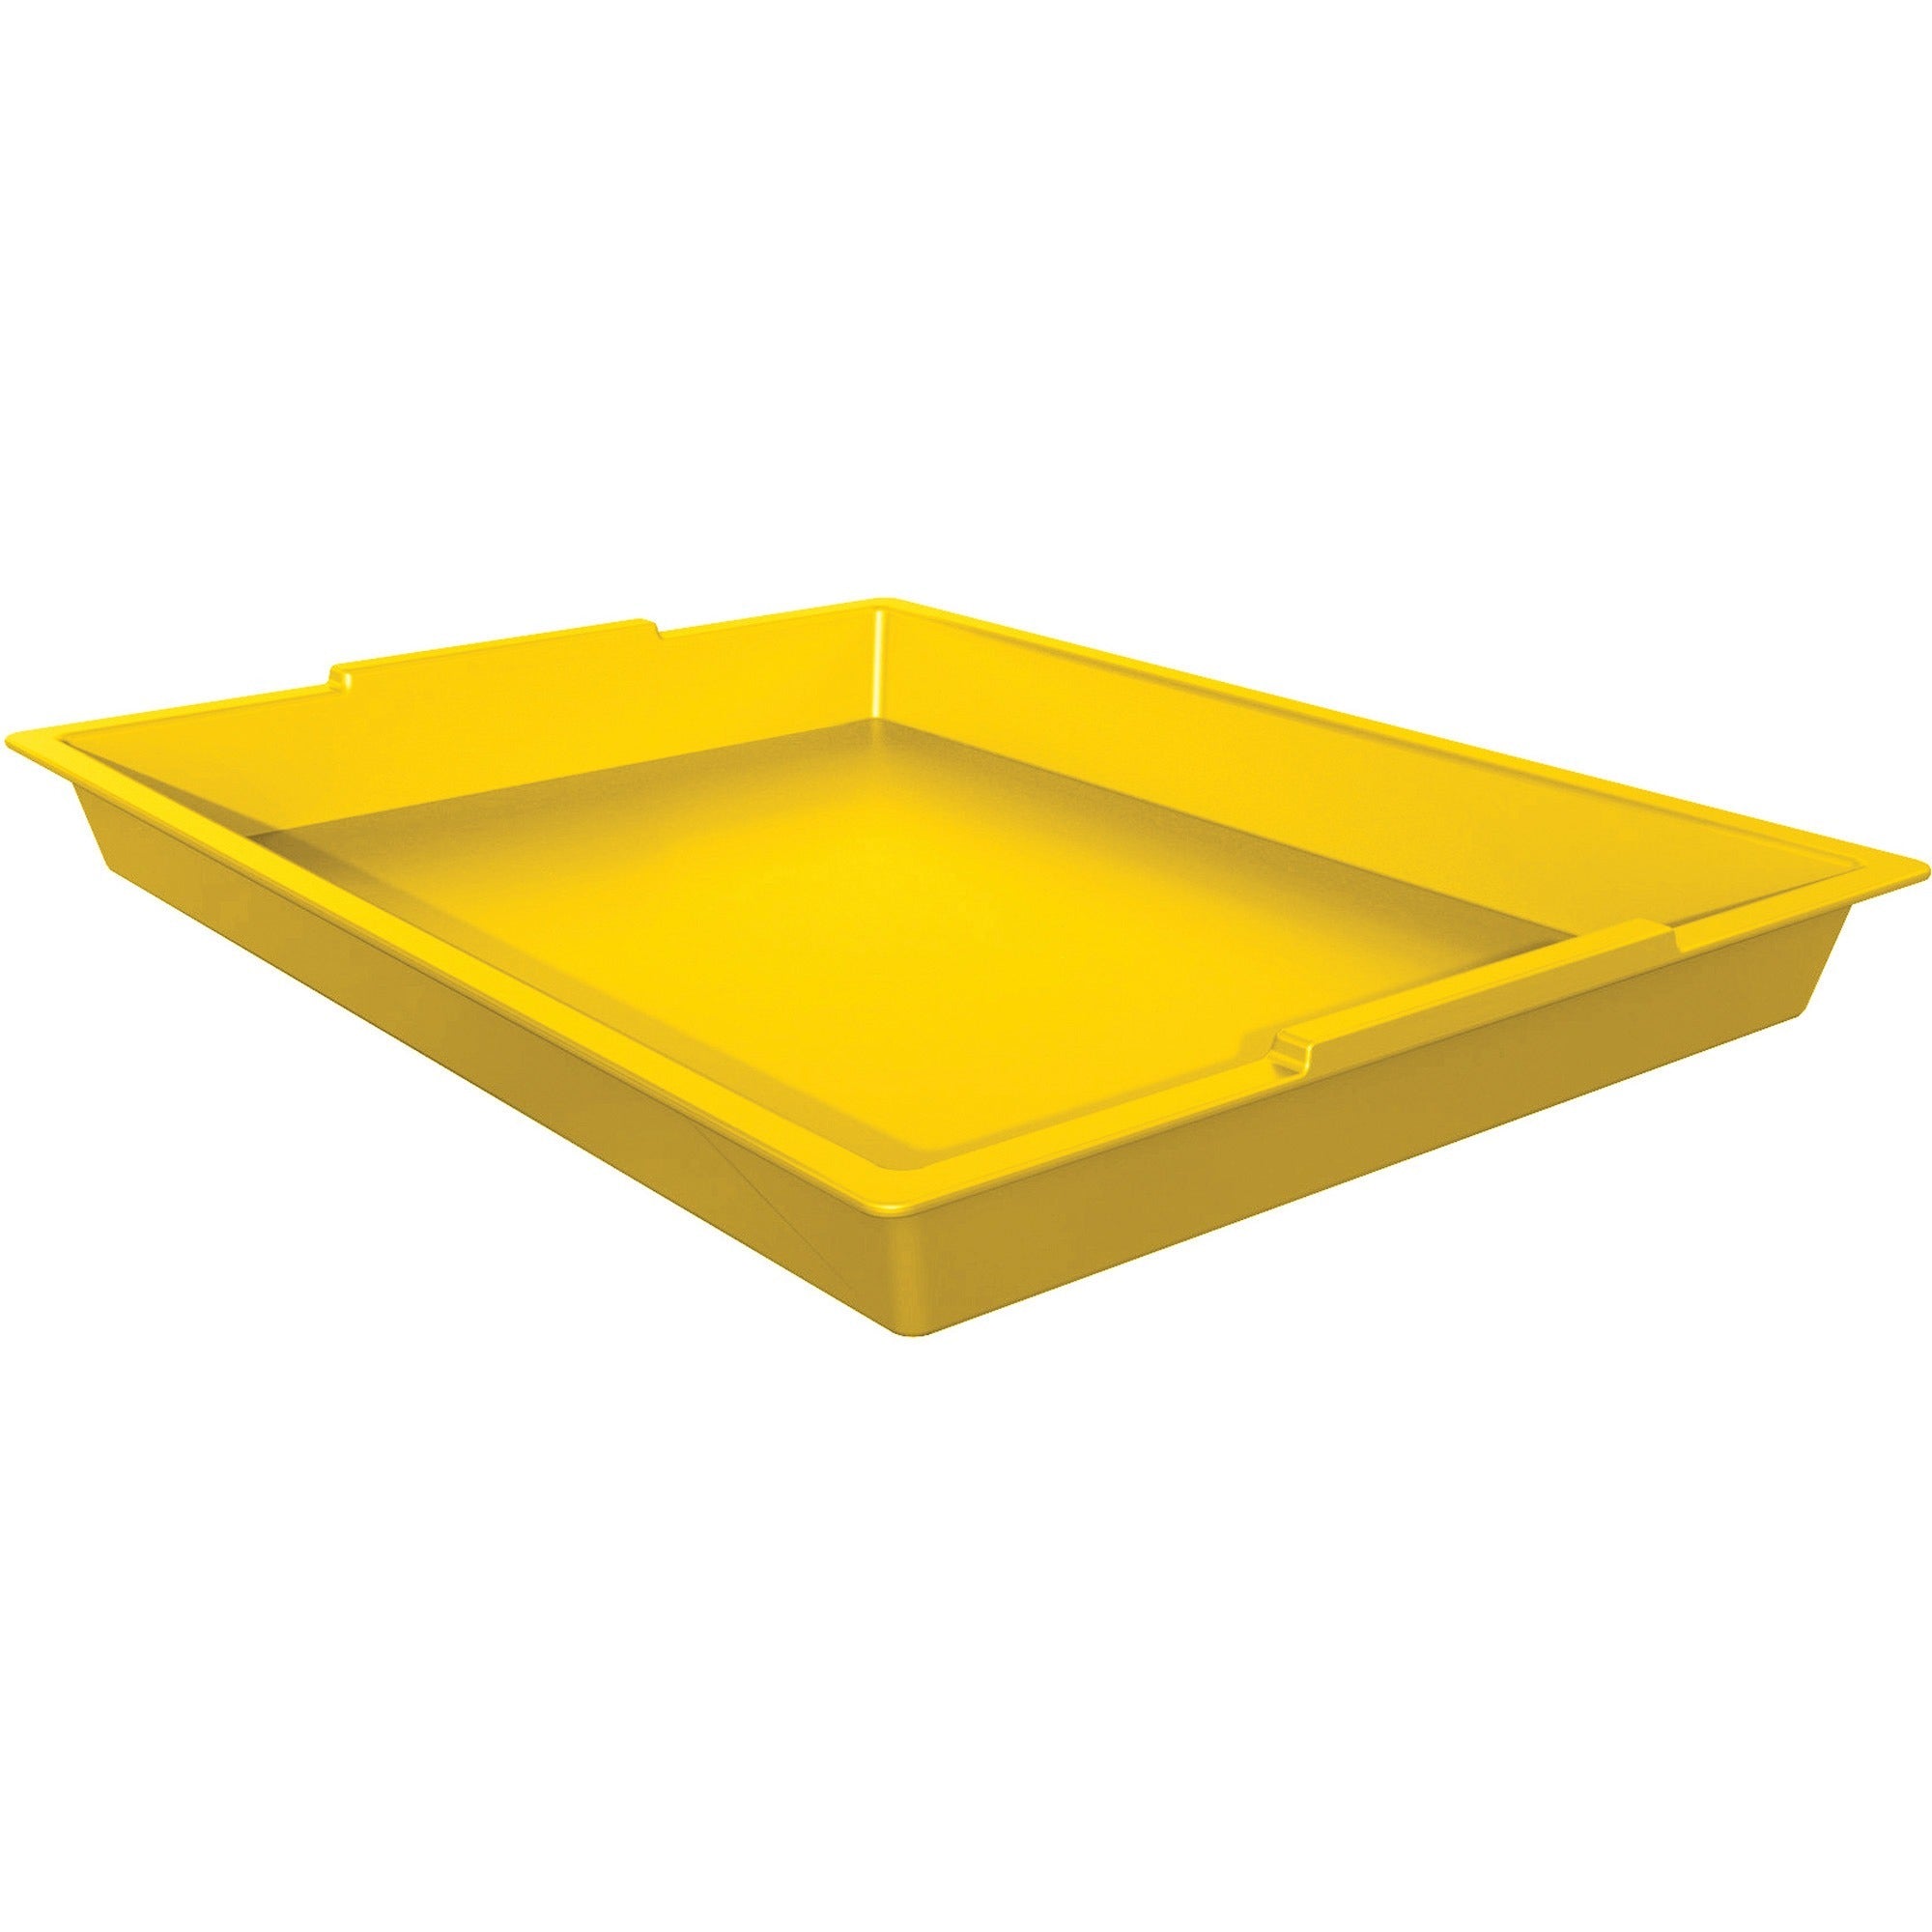 deflecto-antimicrobial-finger-paint-tray-painting-183height-x-1604width-x-1207depth-yellow-polypropylene-plastic_def39507yel - 4